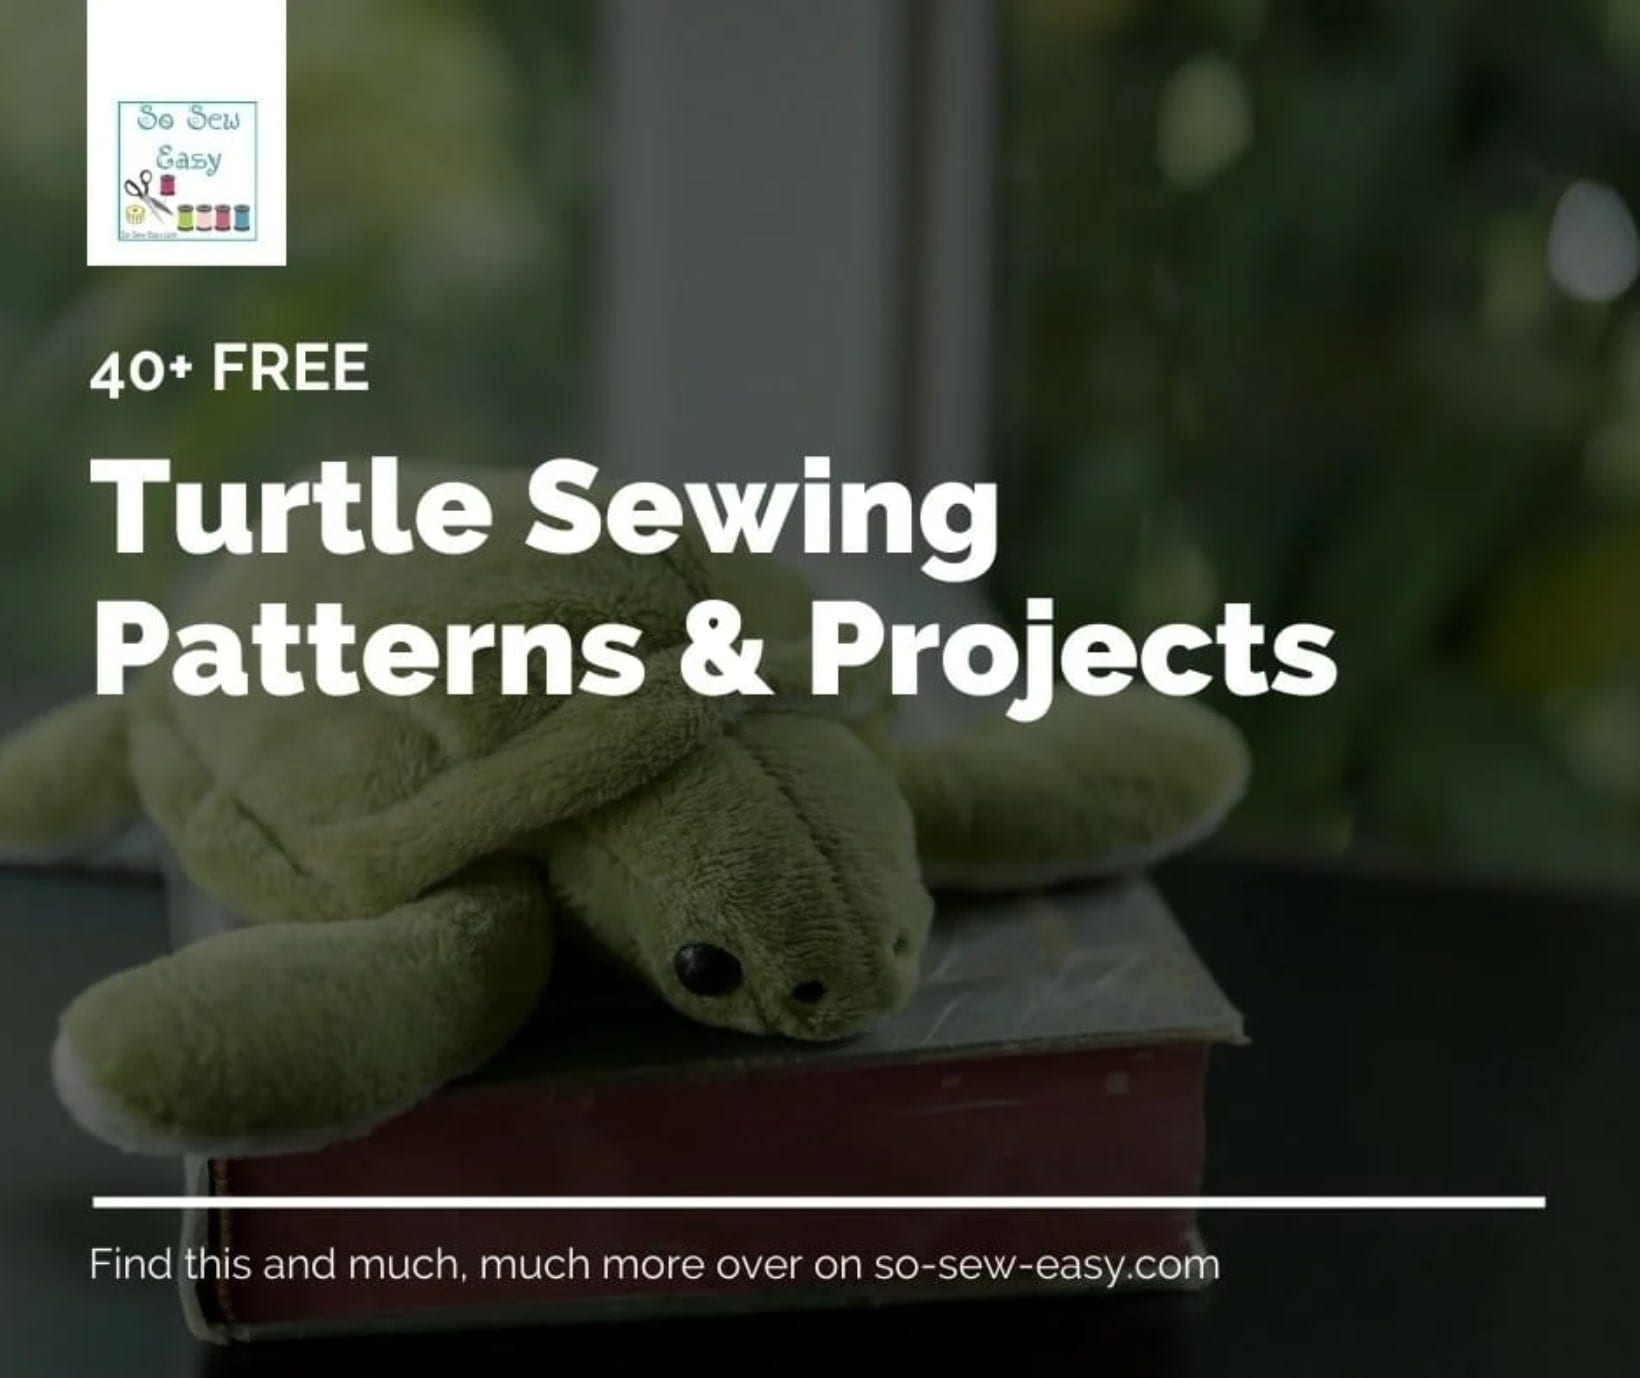 40+ FREE Turtle Sewing Patterns & Projects | Sewing 4 Free